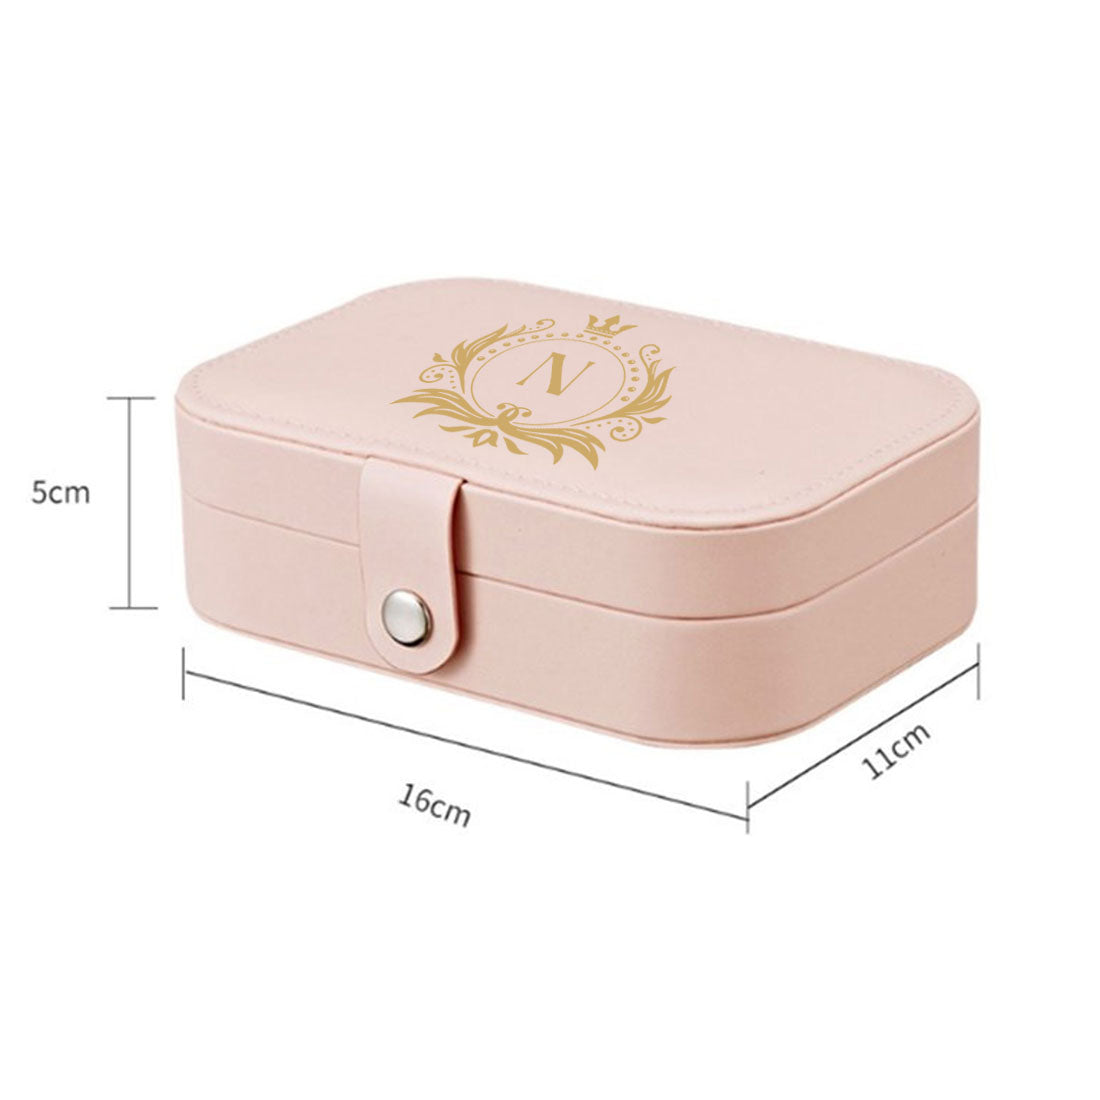 Customized Jewelry Box Organizer for Travel Storage Case for Rings Earrings and Pendants- Golden Monogram